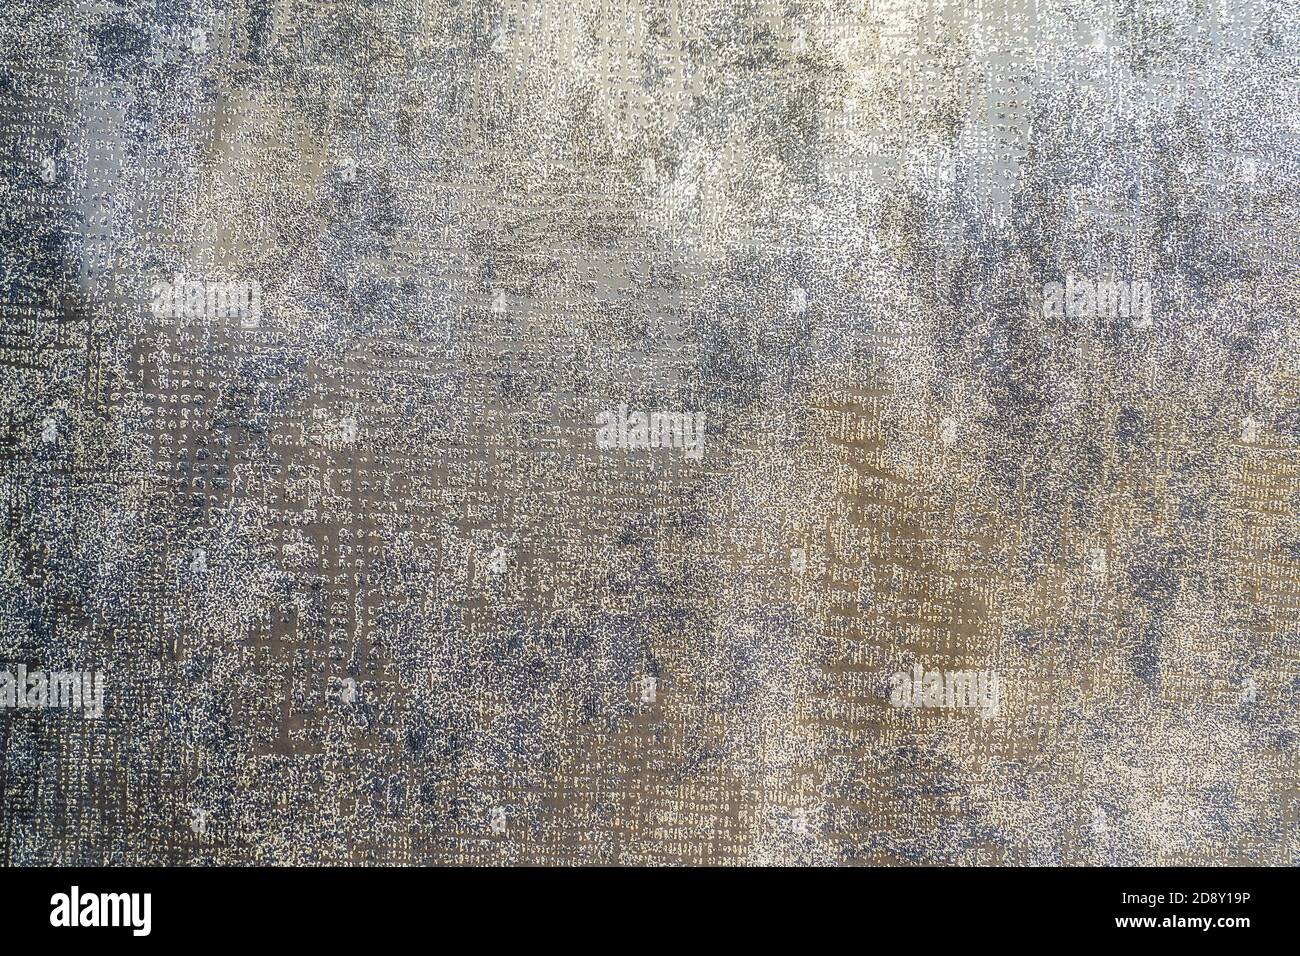 Vintage Texture with Patterns. Fashionable Modern Wallpaper or Textile. Suitable for Creating a Background Stock Photo